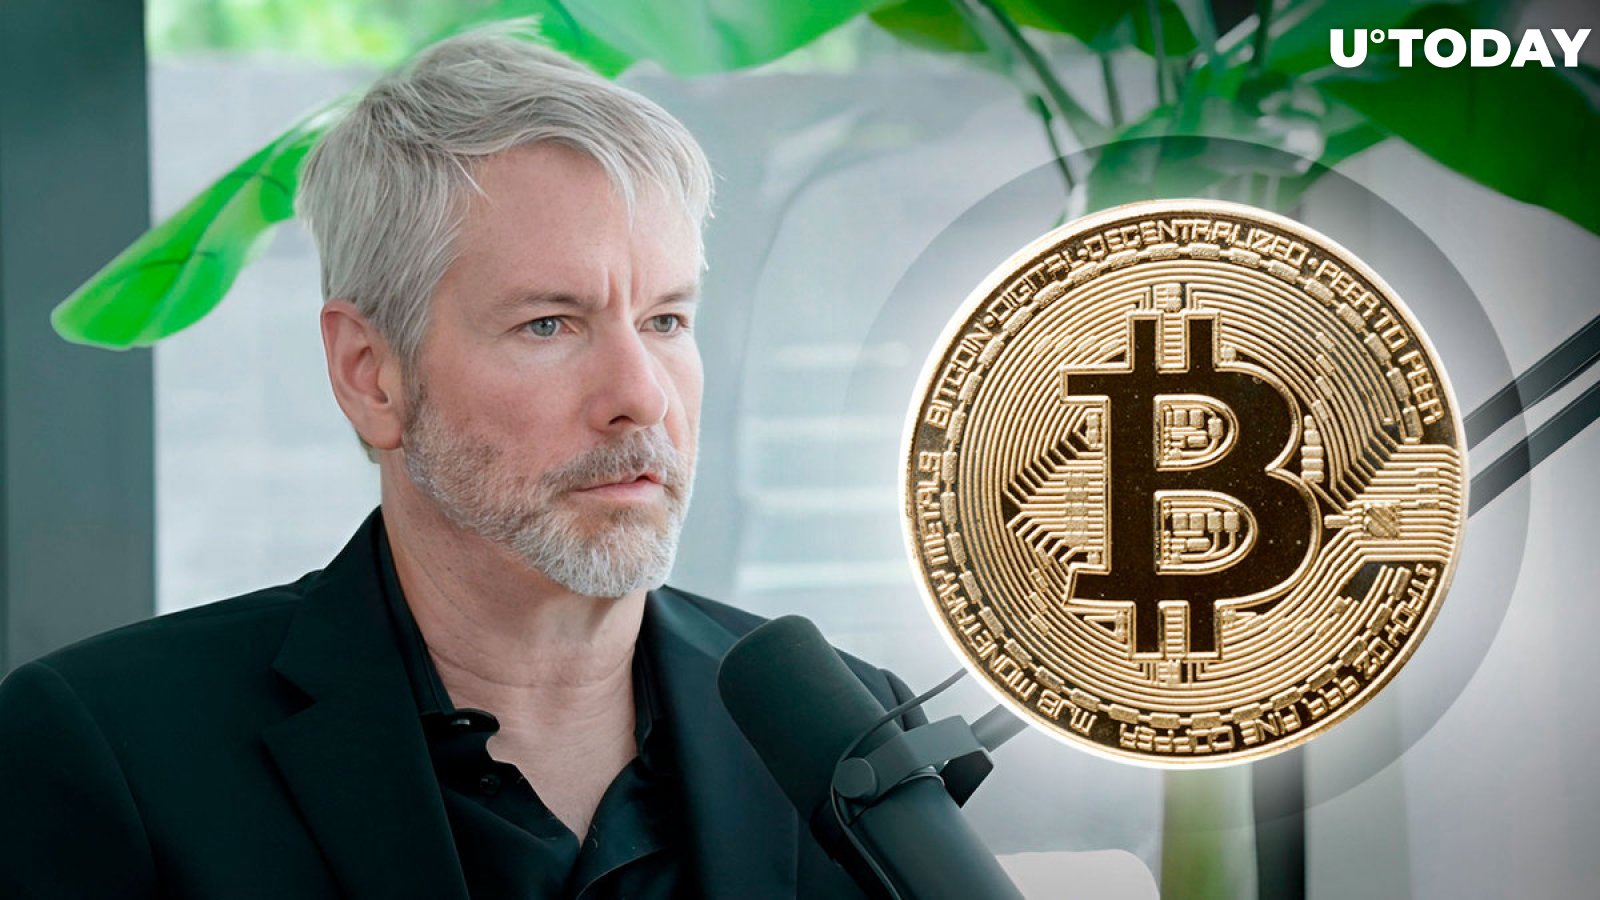 Michael Saylor Reacts as Bitcoin Price Reboots on CPI News